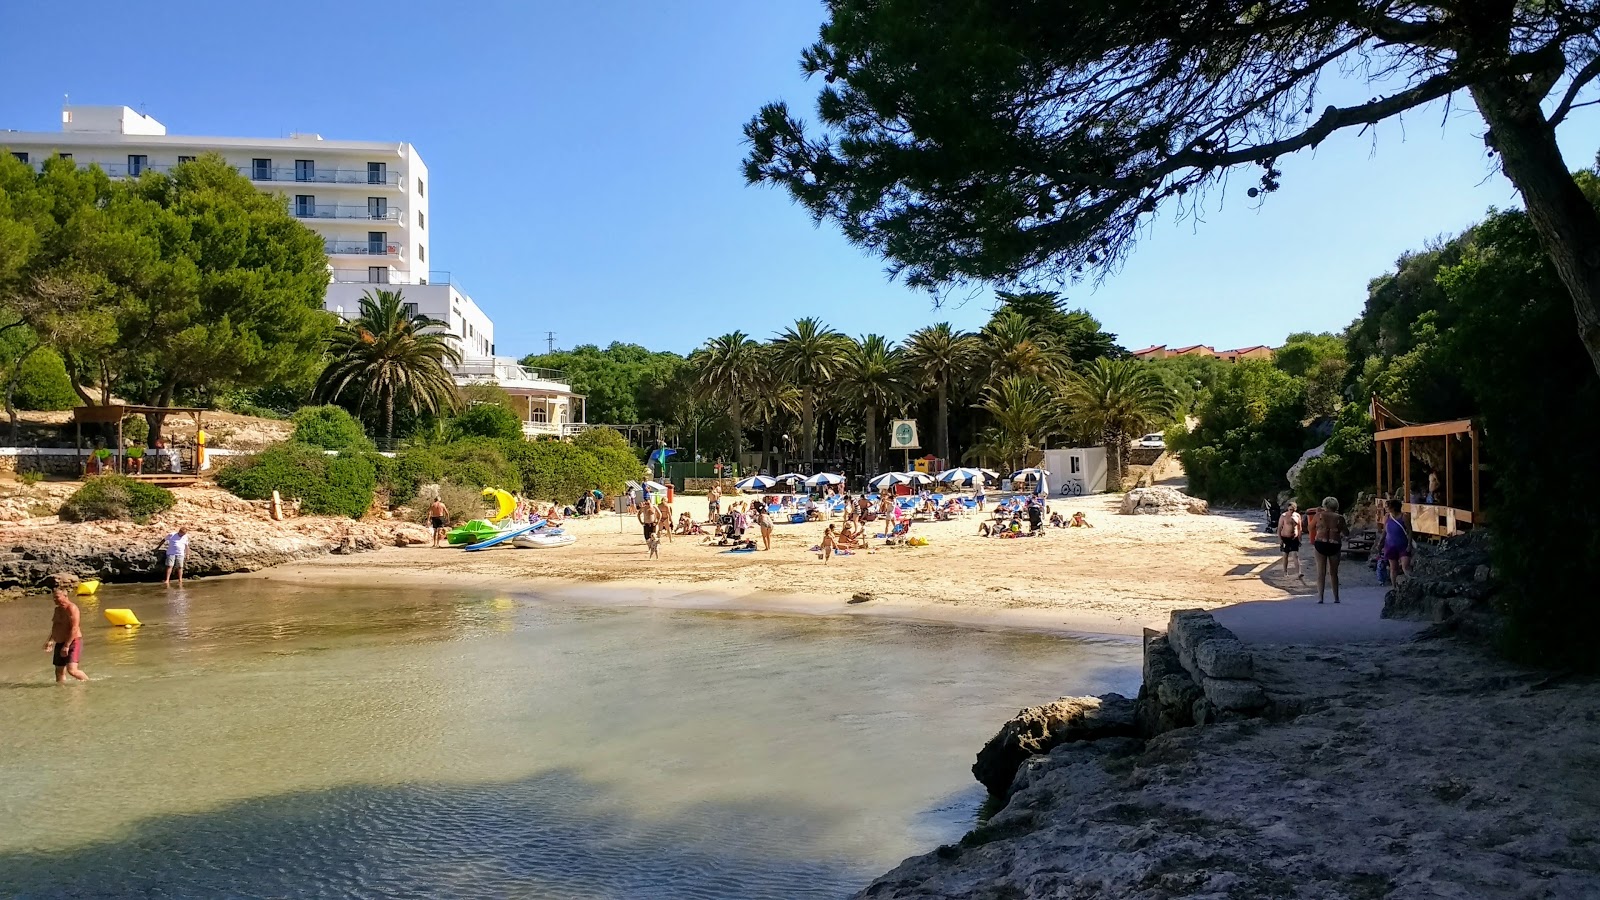 Photo of Cala'n blanes with bright fine sand surface